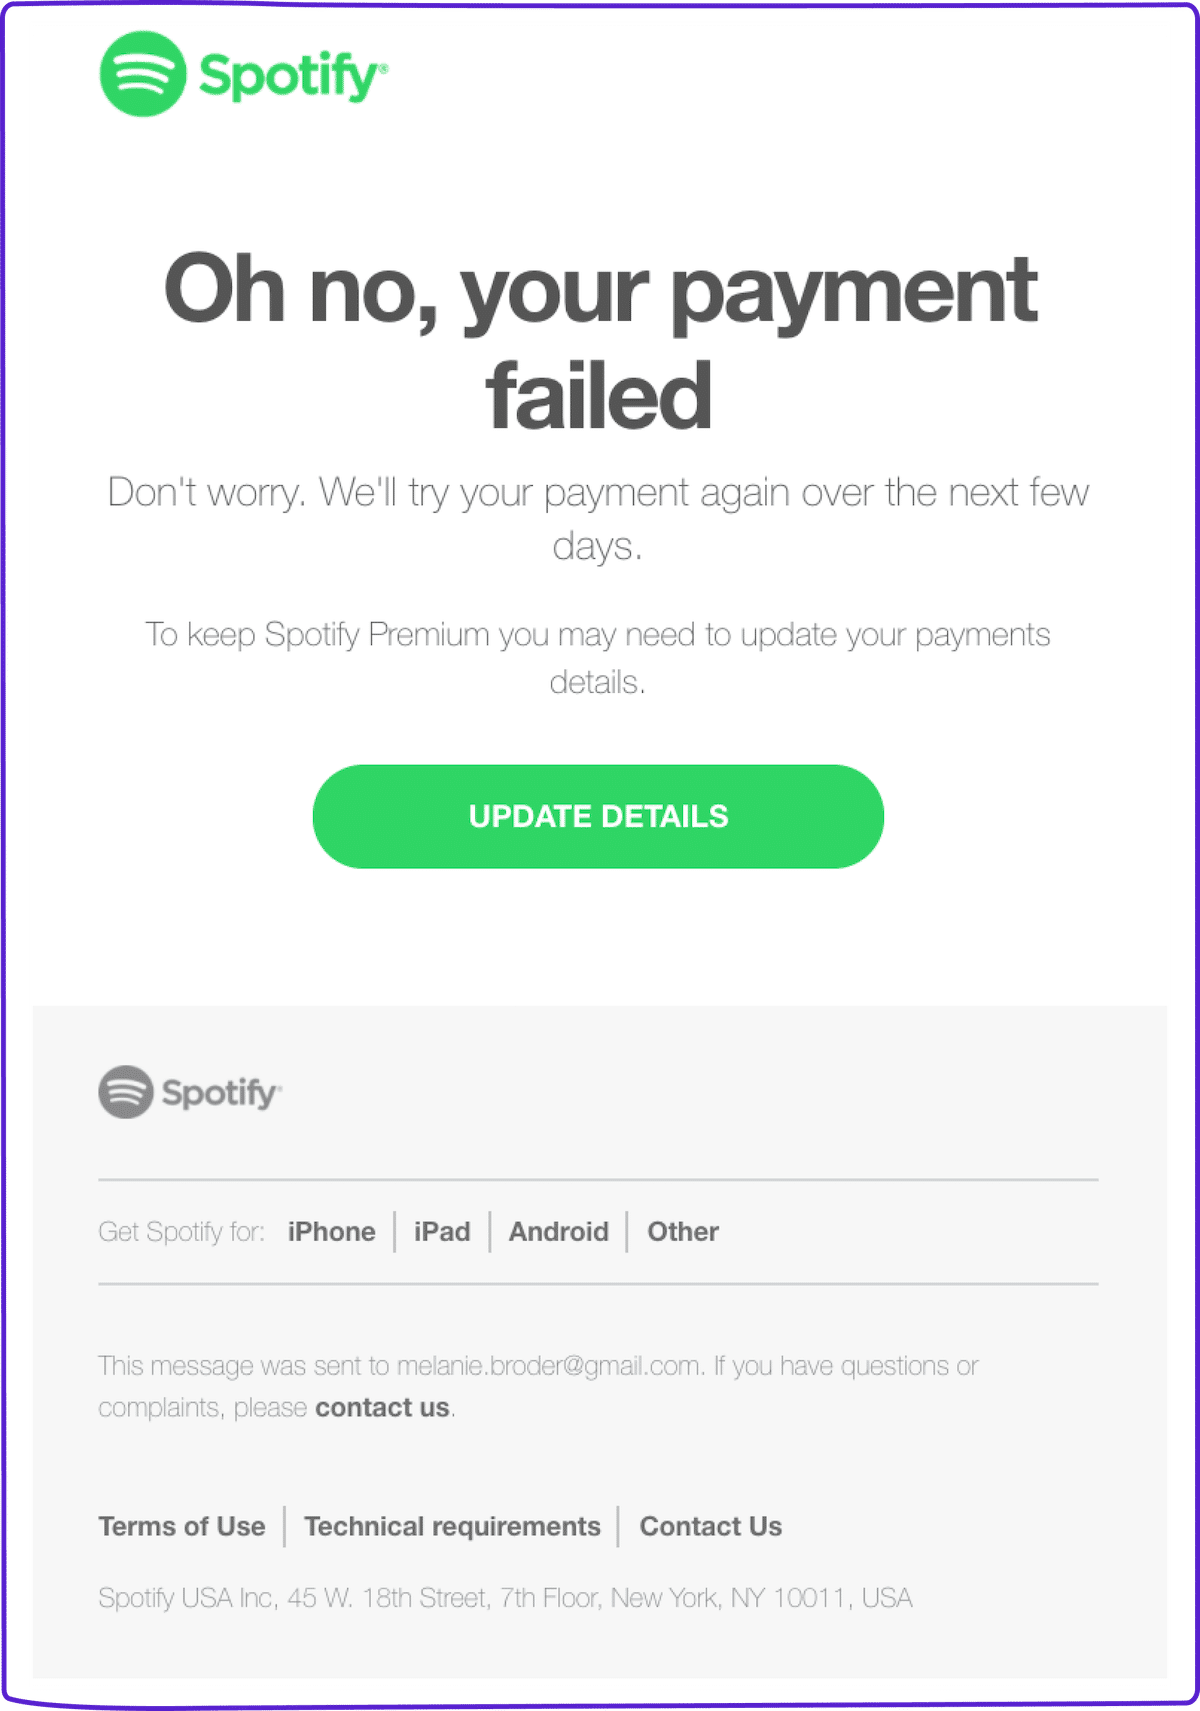 Dunning email example: Spotify